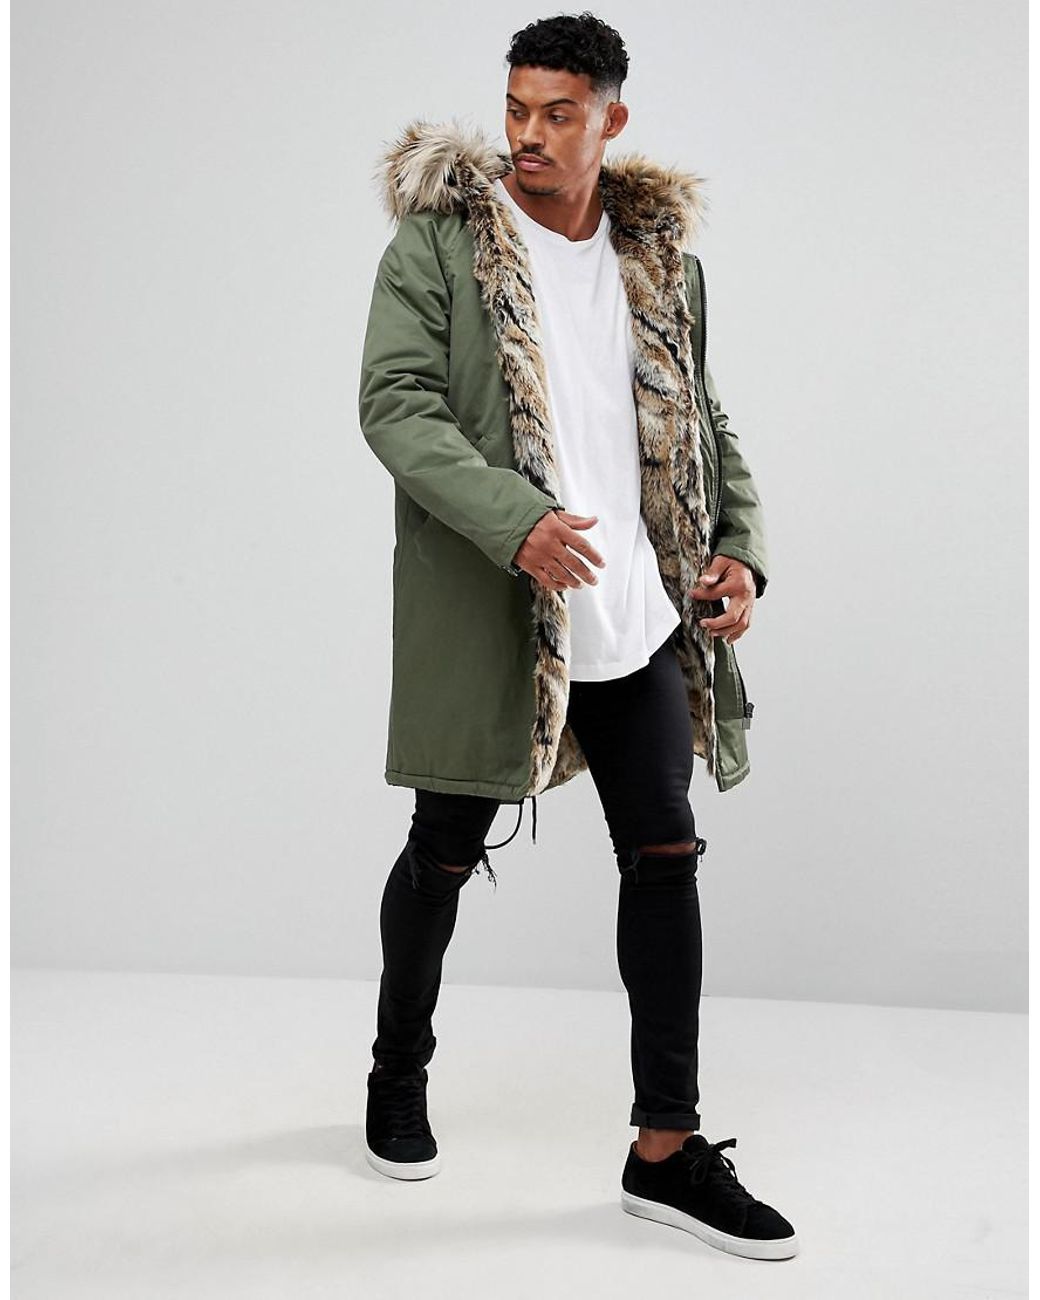 River Island Parka Jacket With Faux Fur Lining In Khaki in Green